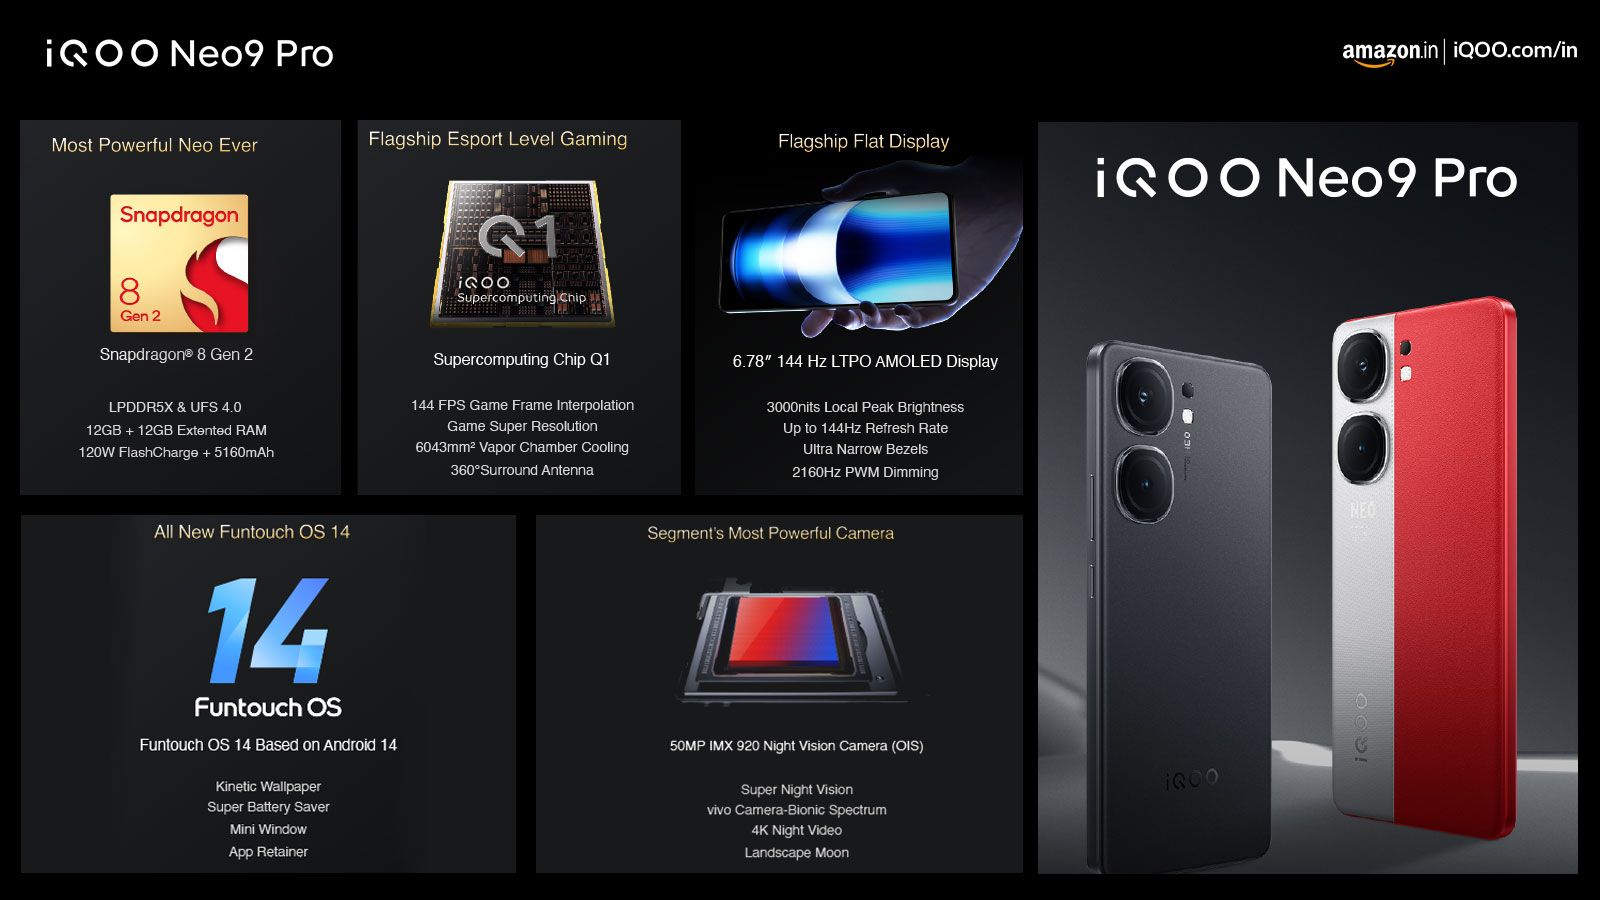 iQOO Neo 9 Pro: Key Specs and Features